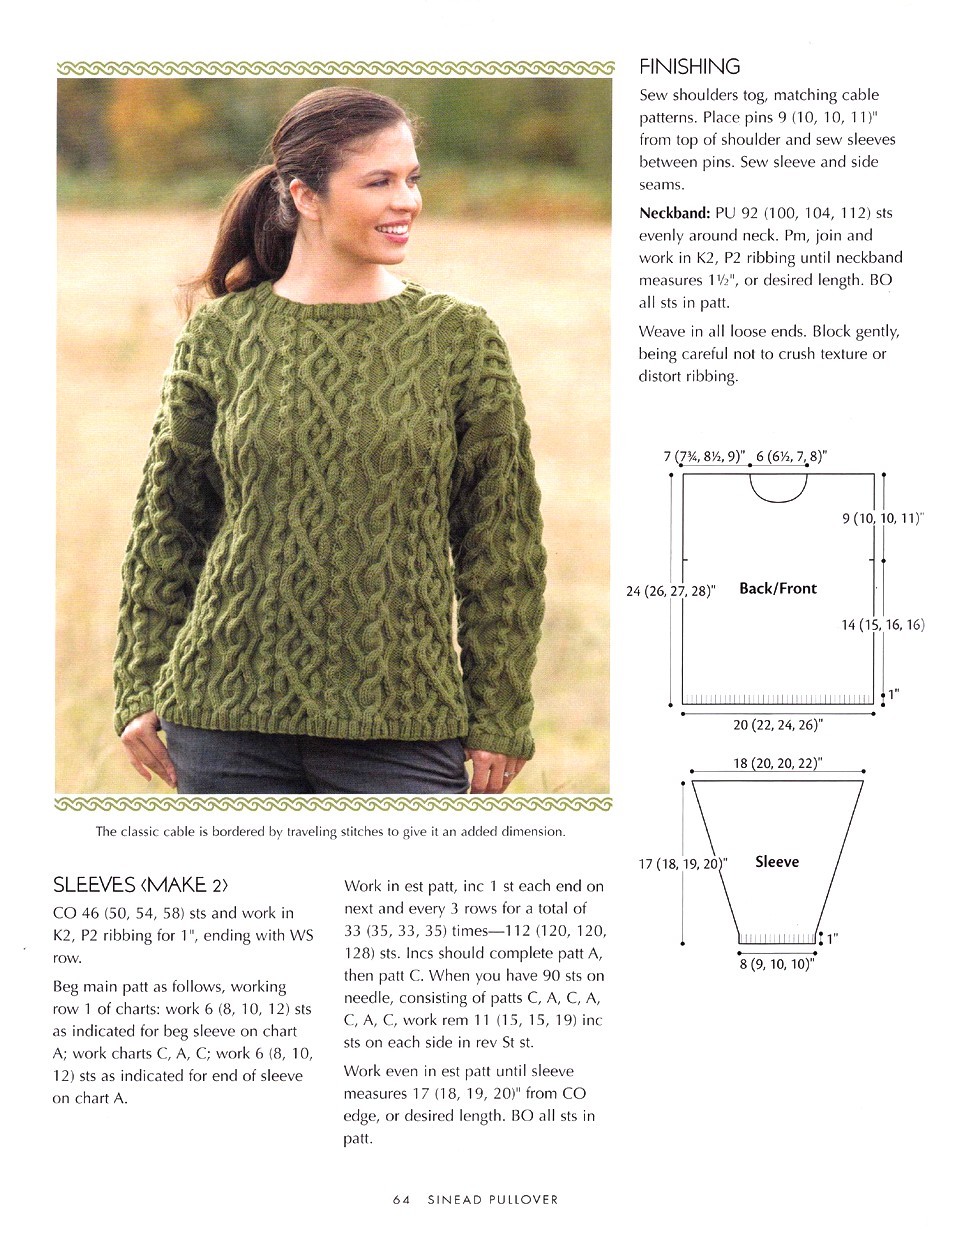 Cable Confidence. A Guide to Textured Knitting - 2008 64